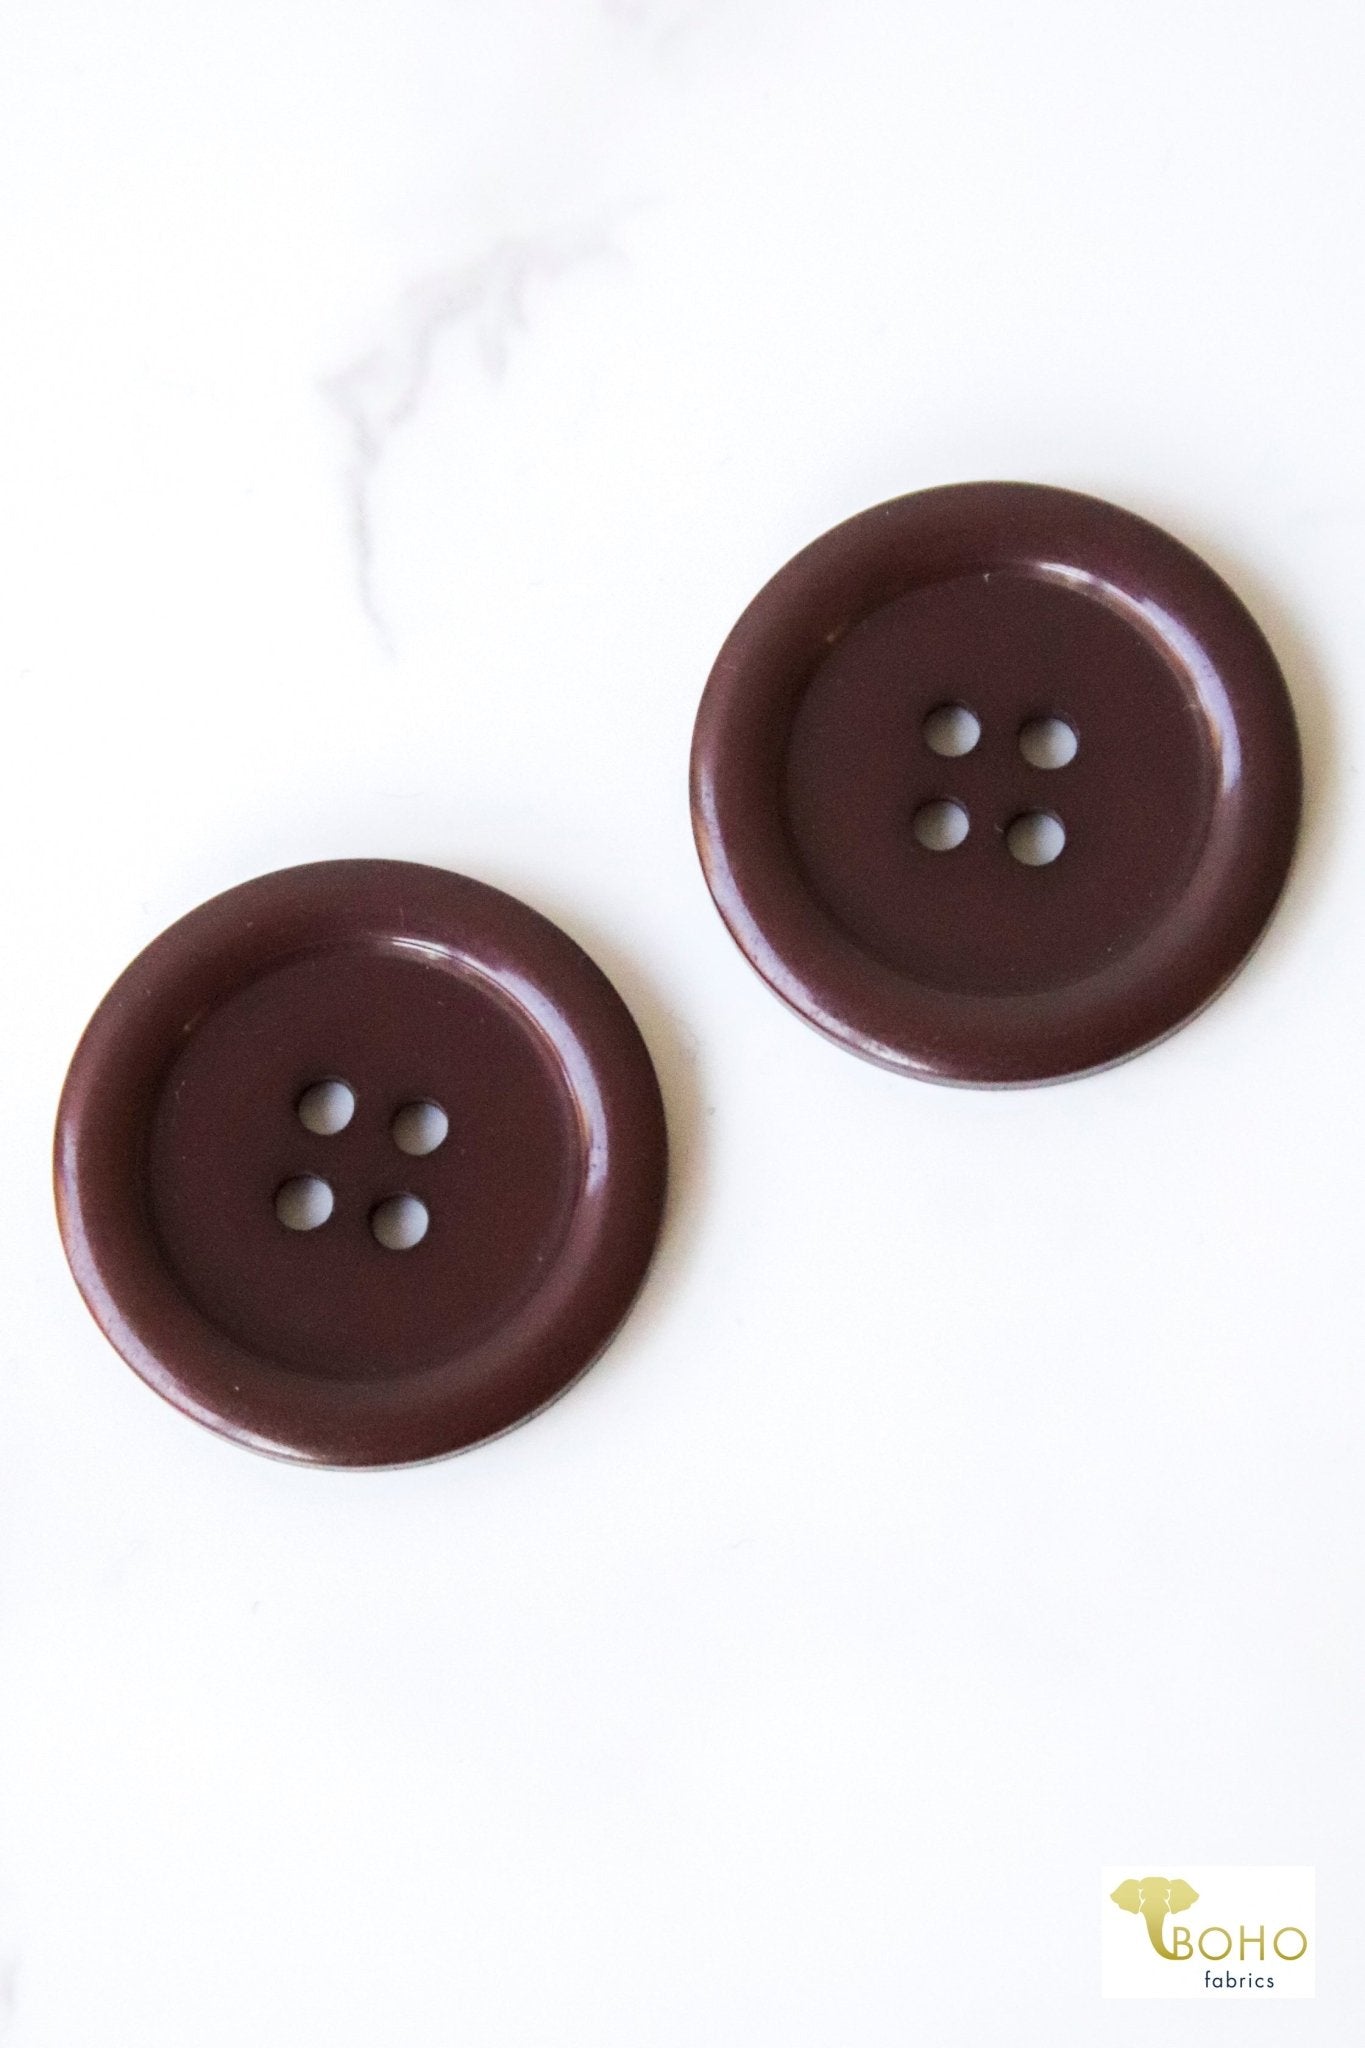 Mocha Brown Bevel, 4 Hole Buttons. 40L (25.5mm/ 1") Sold per Package of 25 - Boho Fabrics